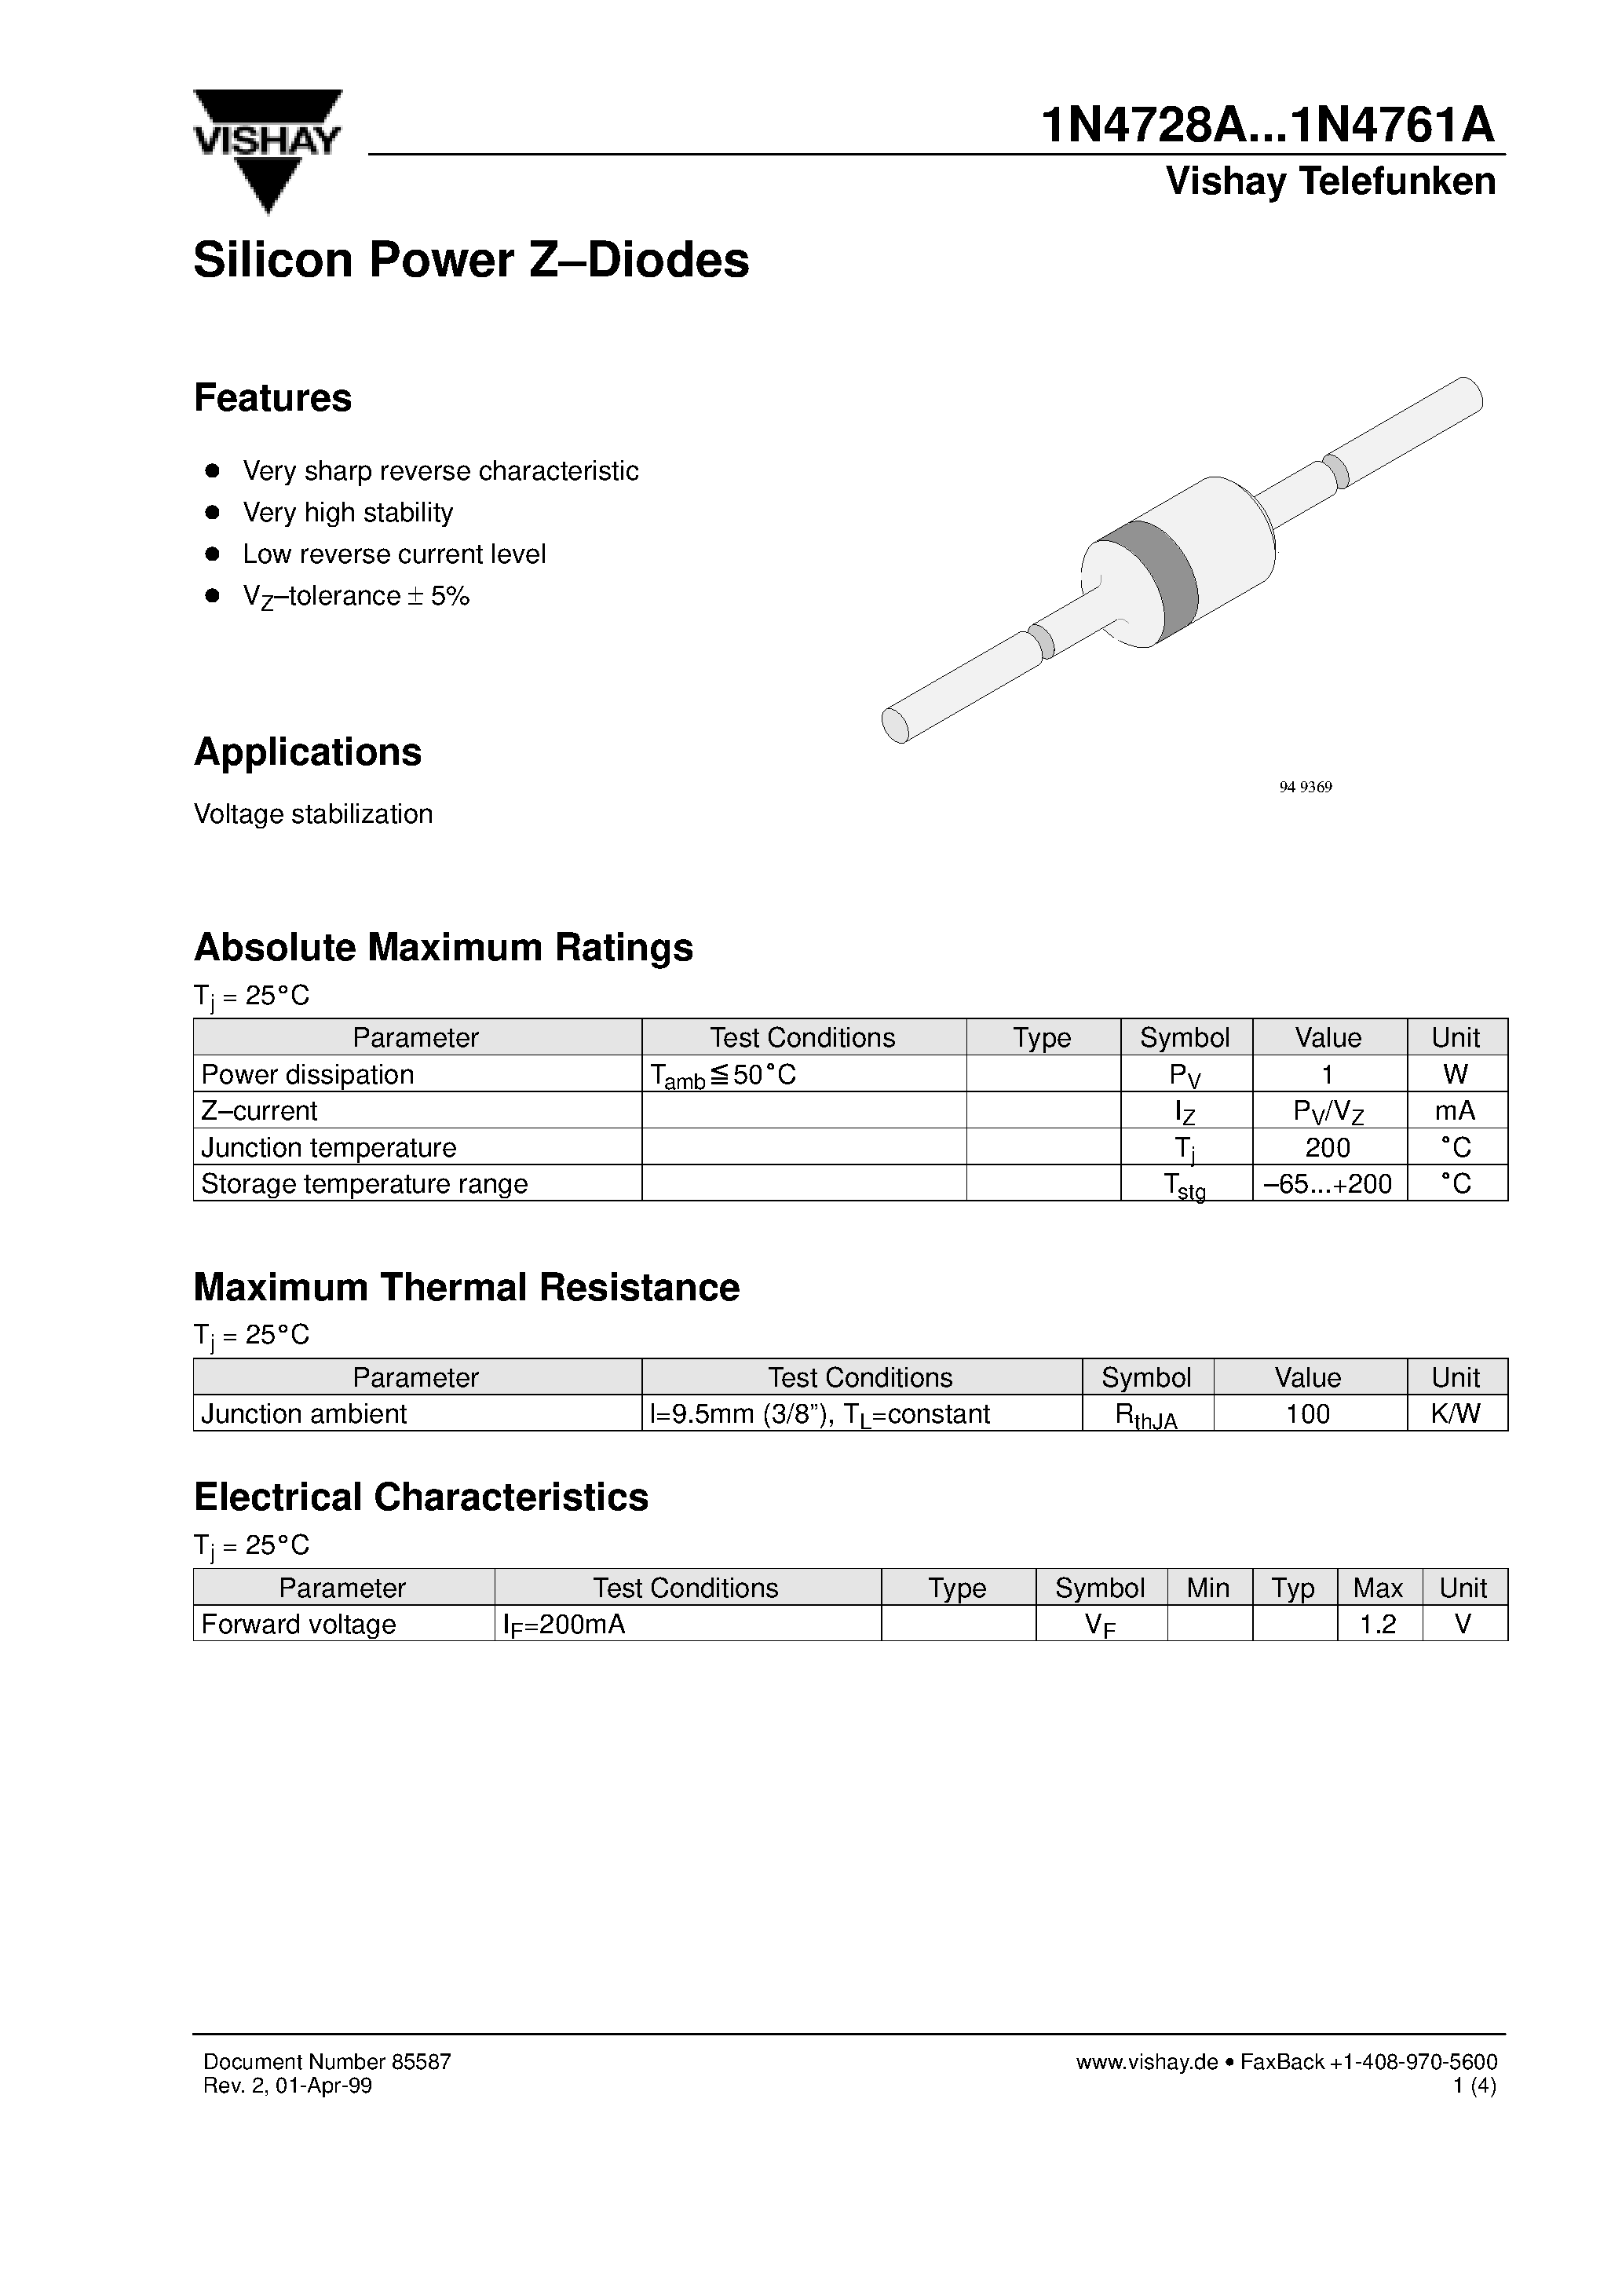 Datasheet 1N4751A - Silicon Power Z-Diodes page 1